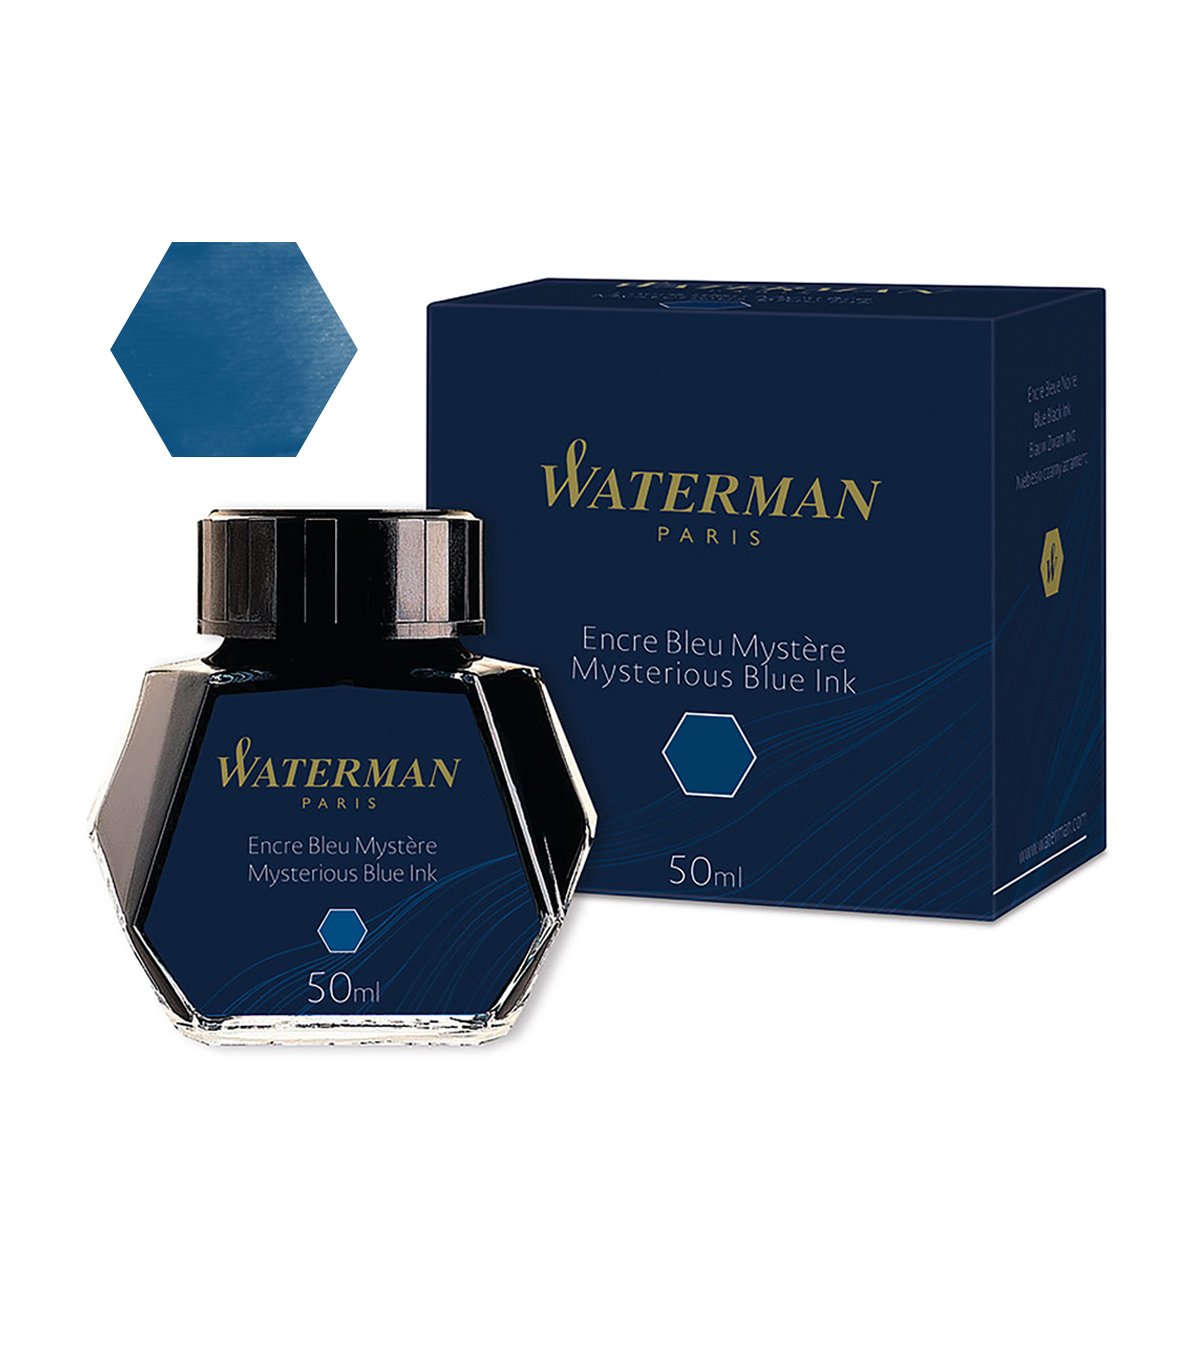 A bottle of Waterman ink in front of a box package.